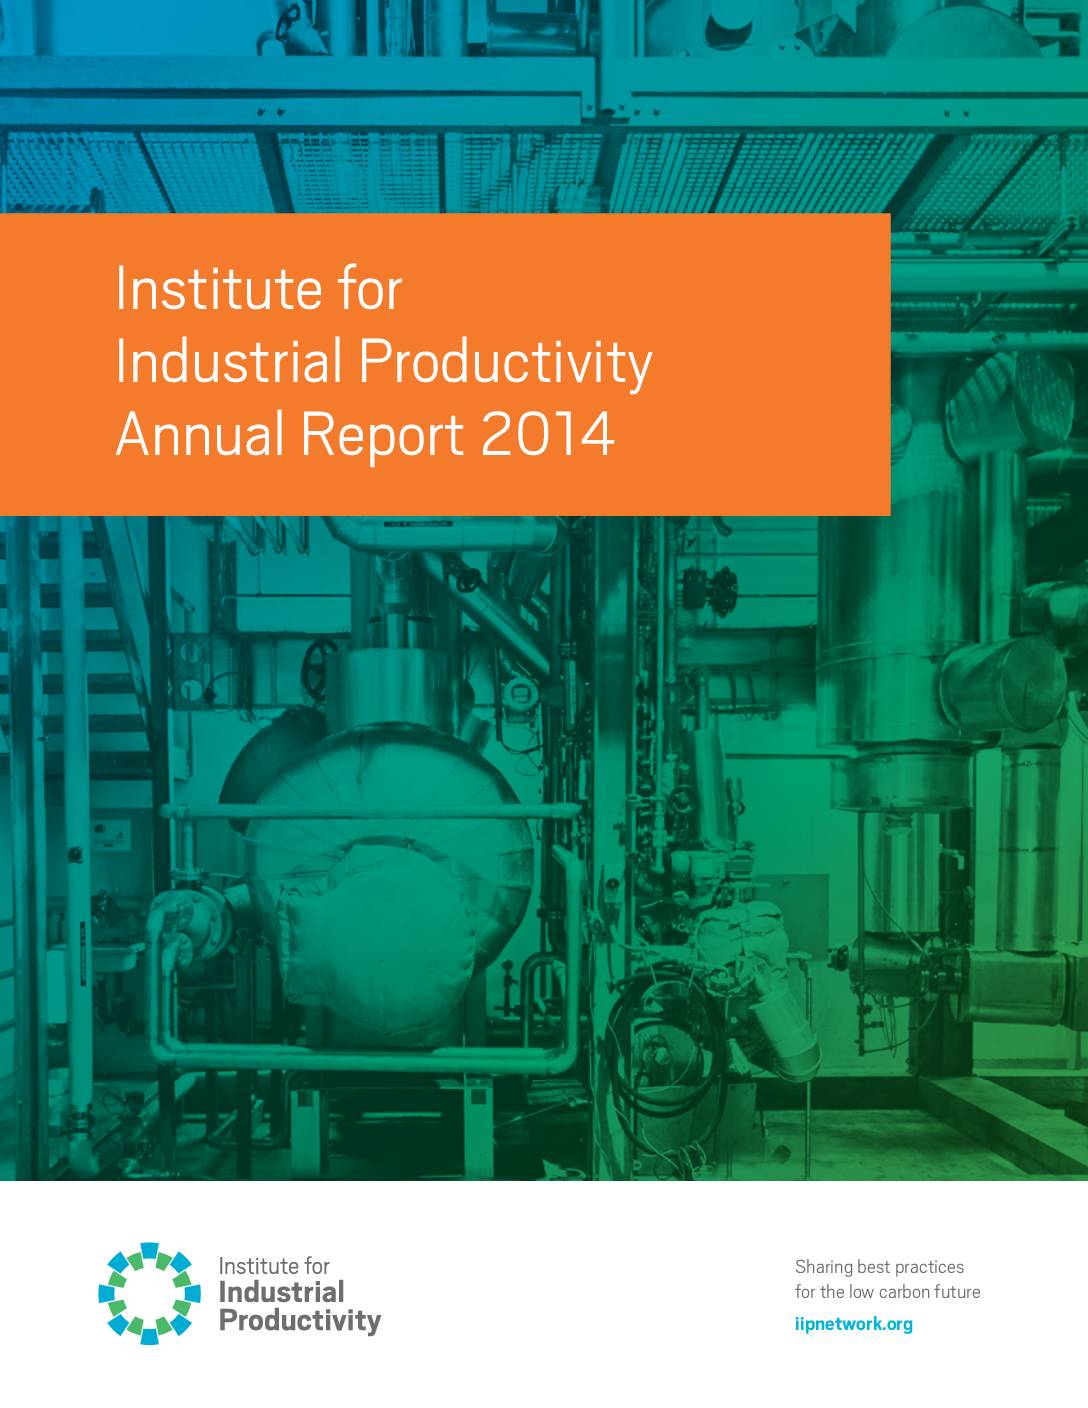 Institute for Industrial Productivity Annual Report 2014